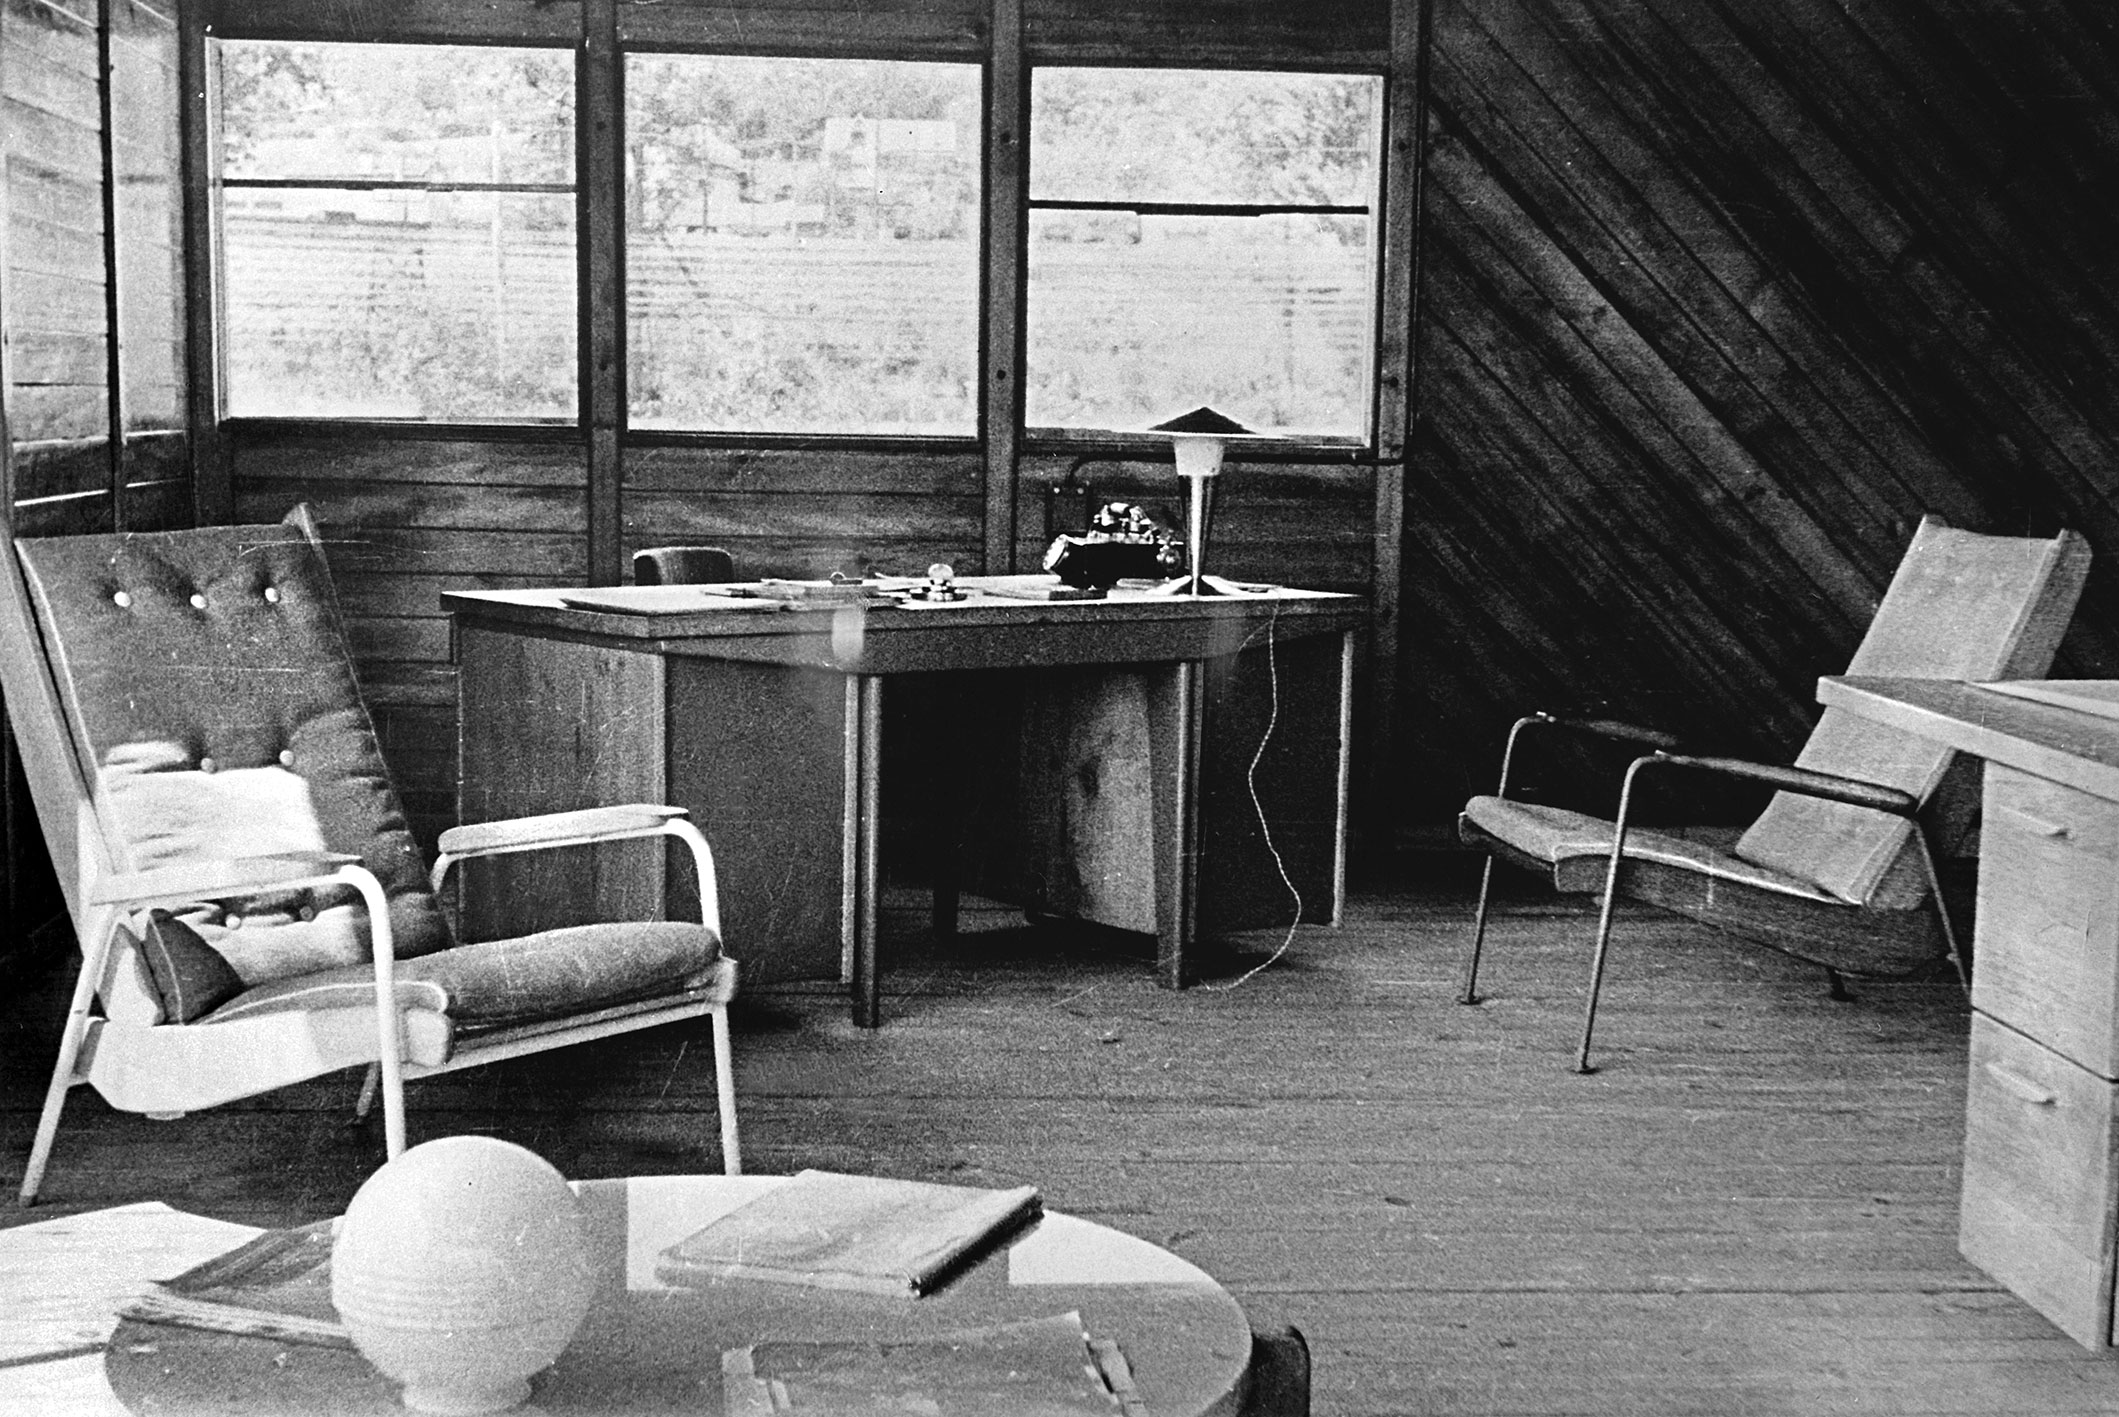 Jean Prouvé’s office at Maxéville, ca. 1948, furnished with Visiteur FV 12 armchairs and a Standard BS desk, later replaced by a Présidence desk.